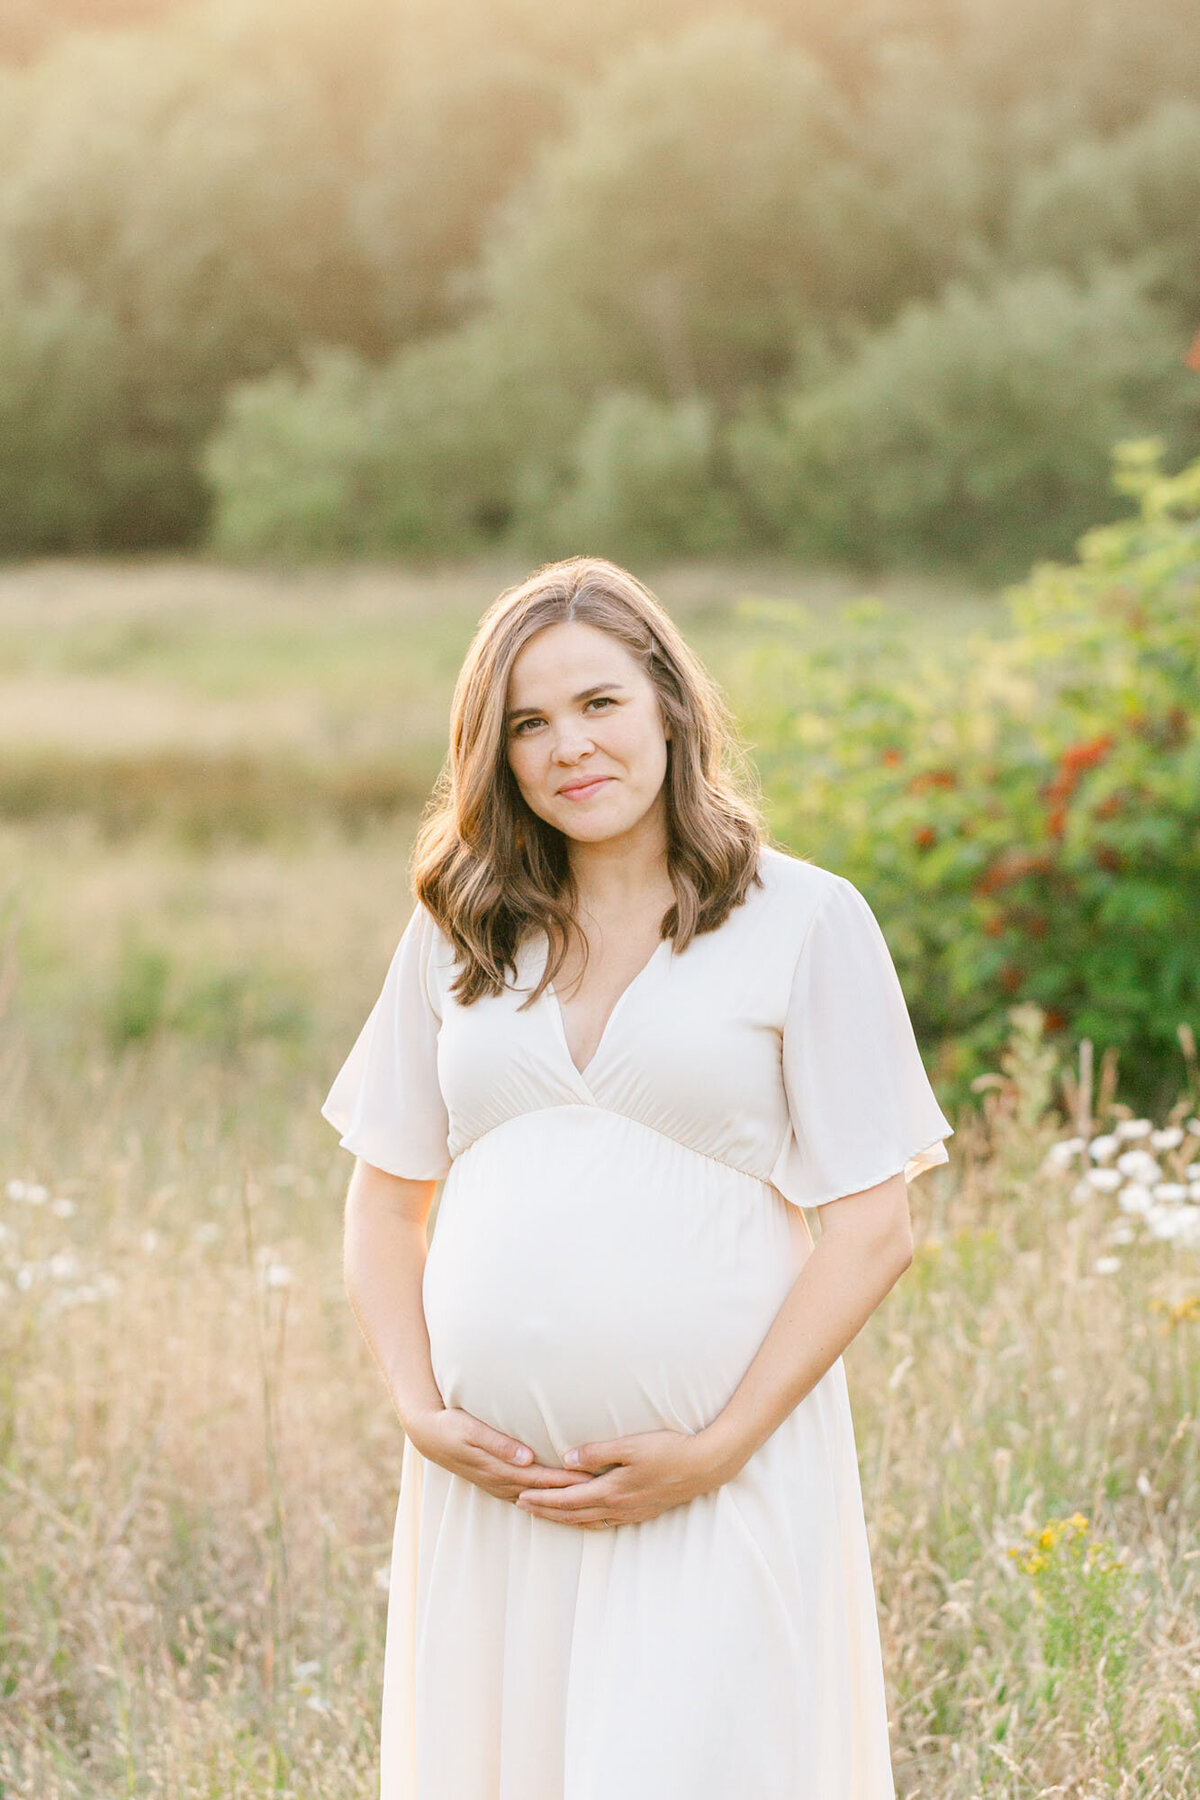 Woman with baby bump standing in a field of golden grasses wearing a cream colored dress. She is holding her bump on the bottom. She has shoulder-length brown hair and has a small grin on her face looking at the camera.